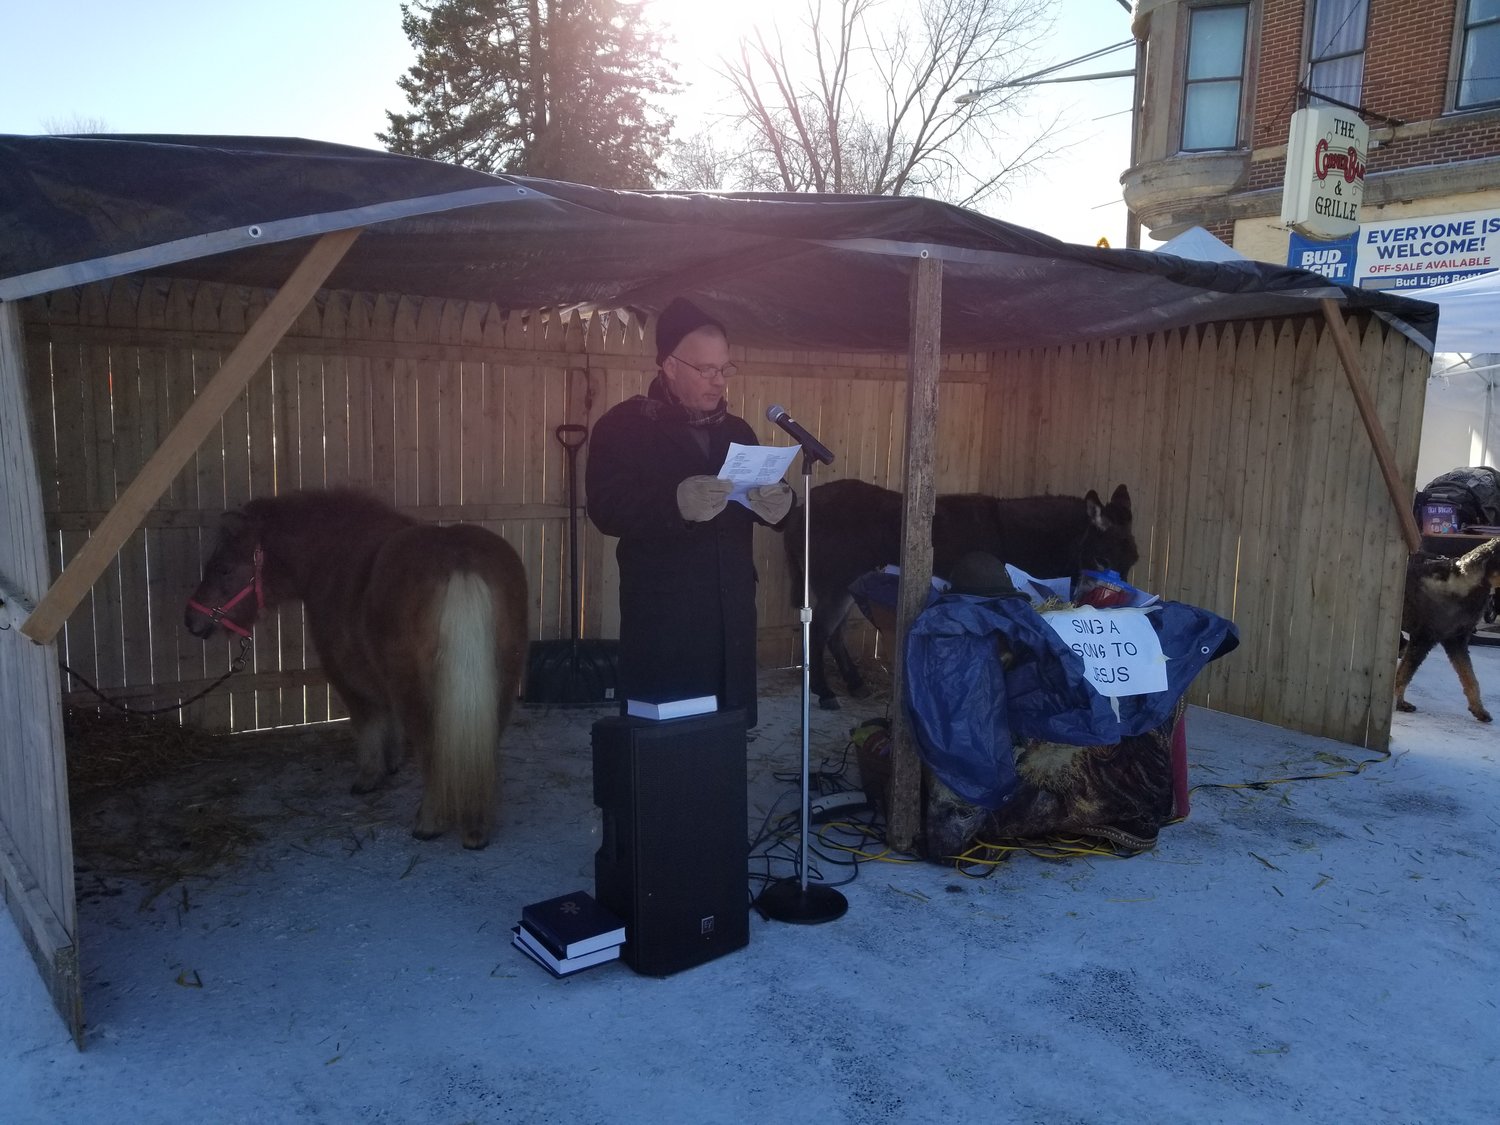 A make-shift stable with a donkey and miniature horse was set up on the South end of 2nd Avenue during the 2nd annual Christkindlmarkt on December 3rd. Pastor Robbin Robbert of St. John’s Lutheran Church, rural Goodhue, encouraged anyone who wanted to sing Christmas carols karaoke style and offered treats to those who participated.